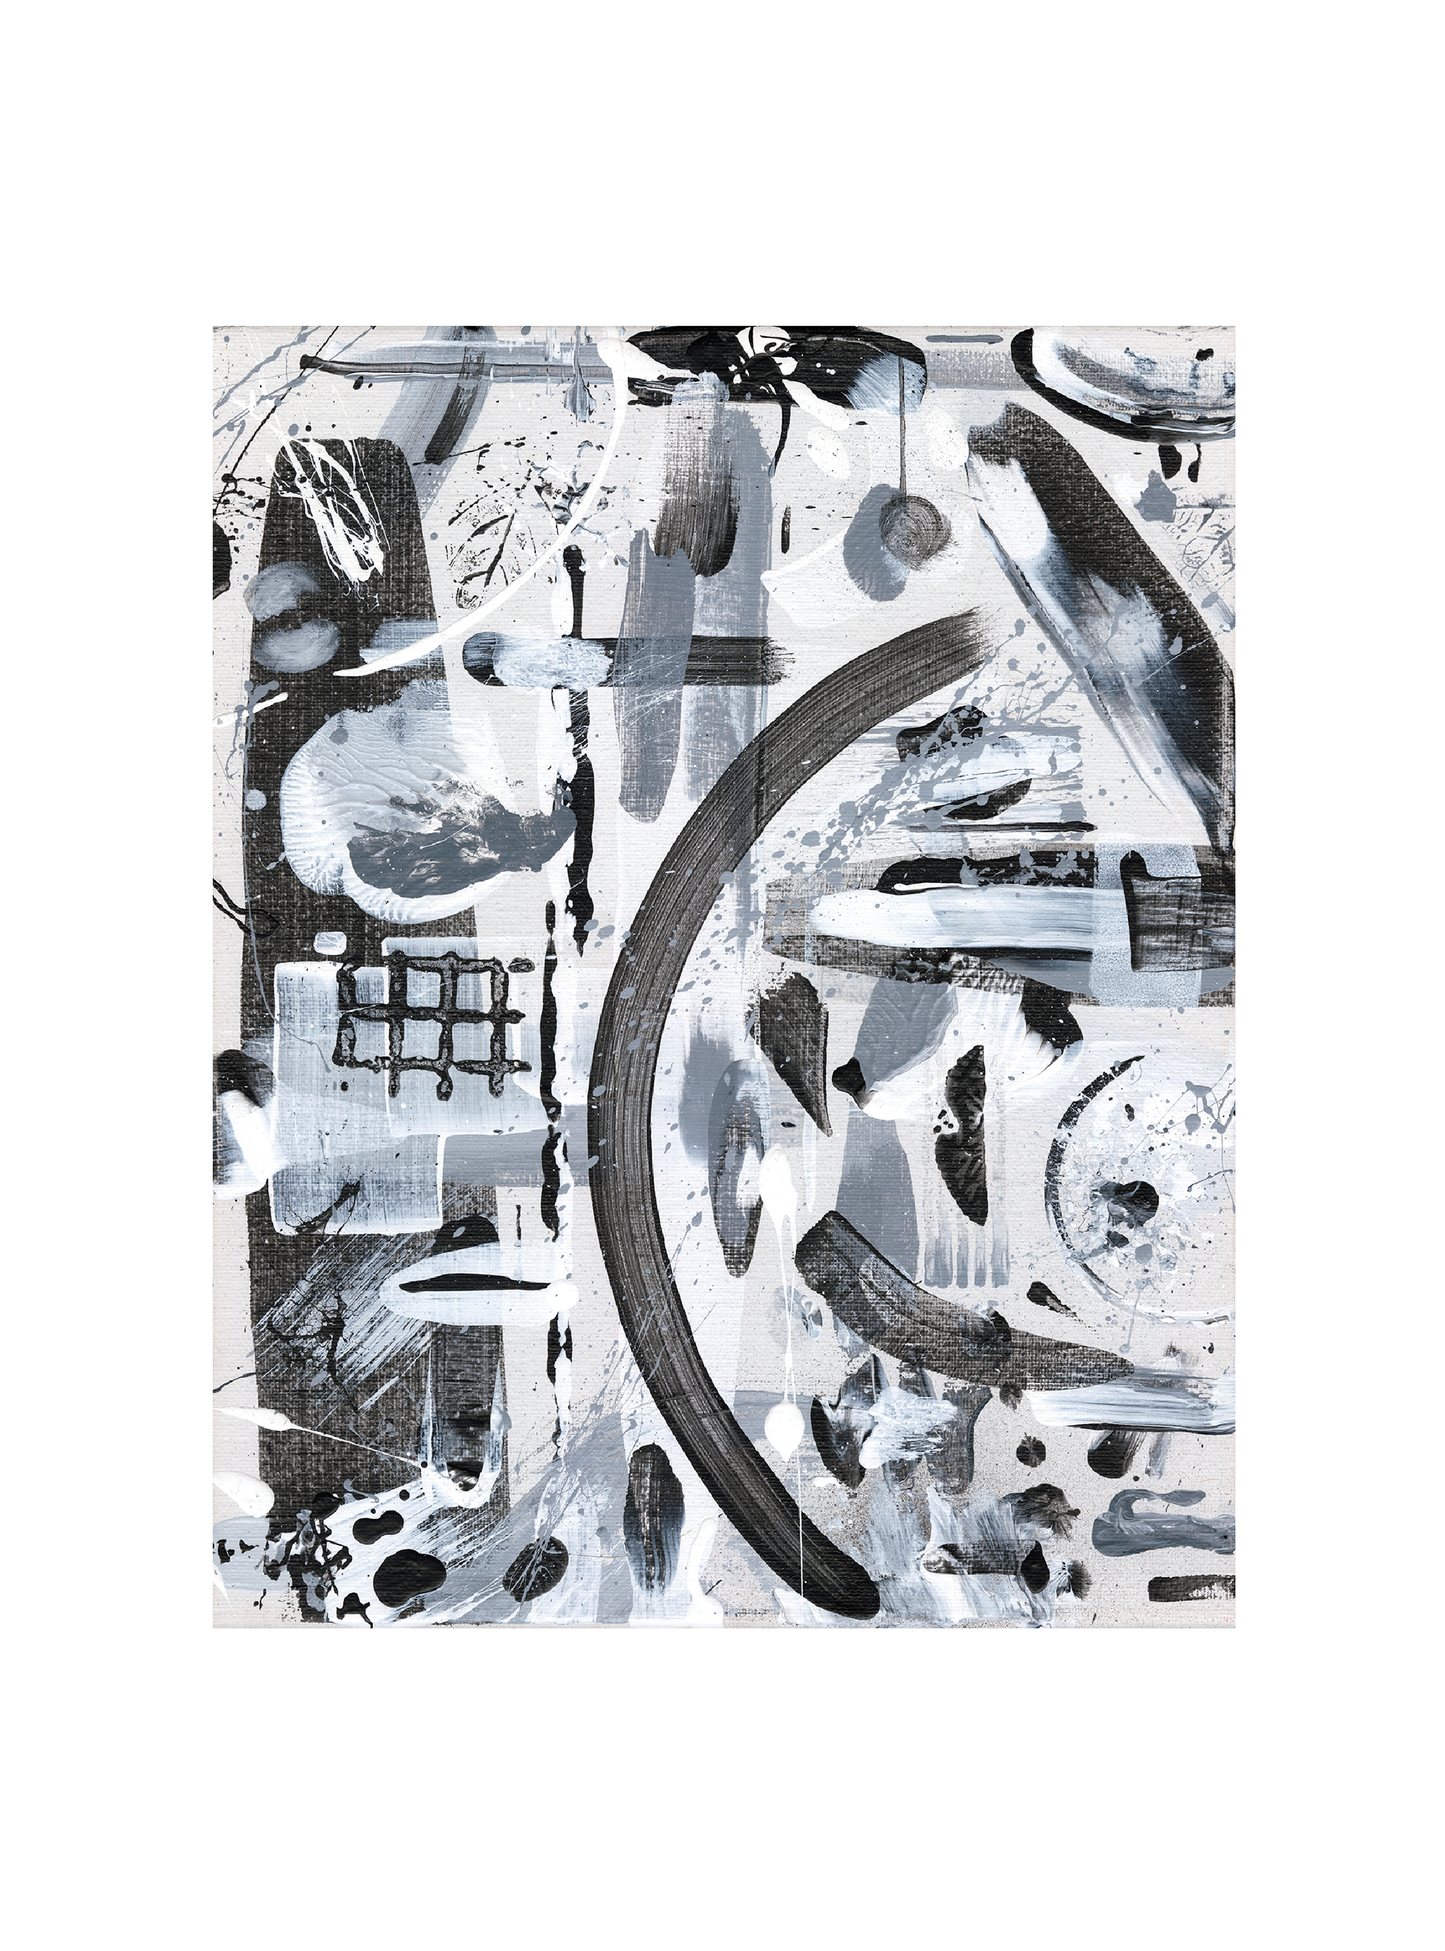 Black and white abstract art print